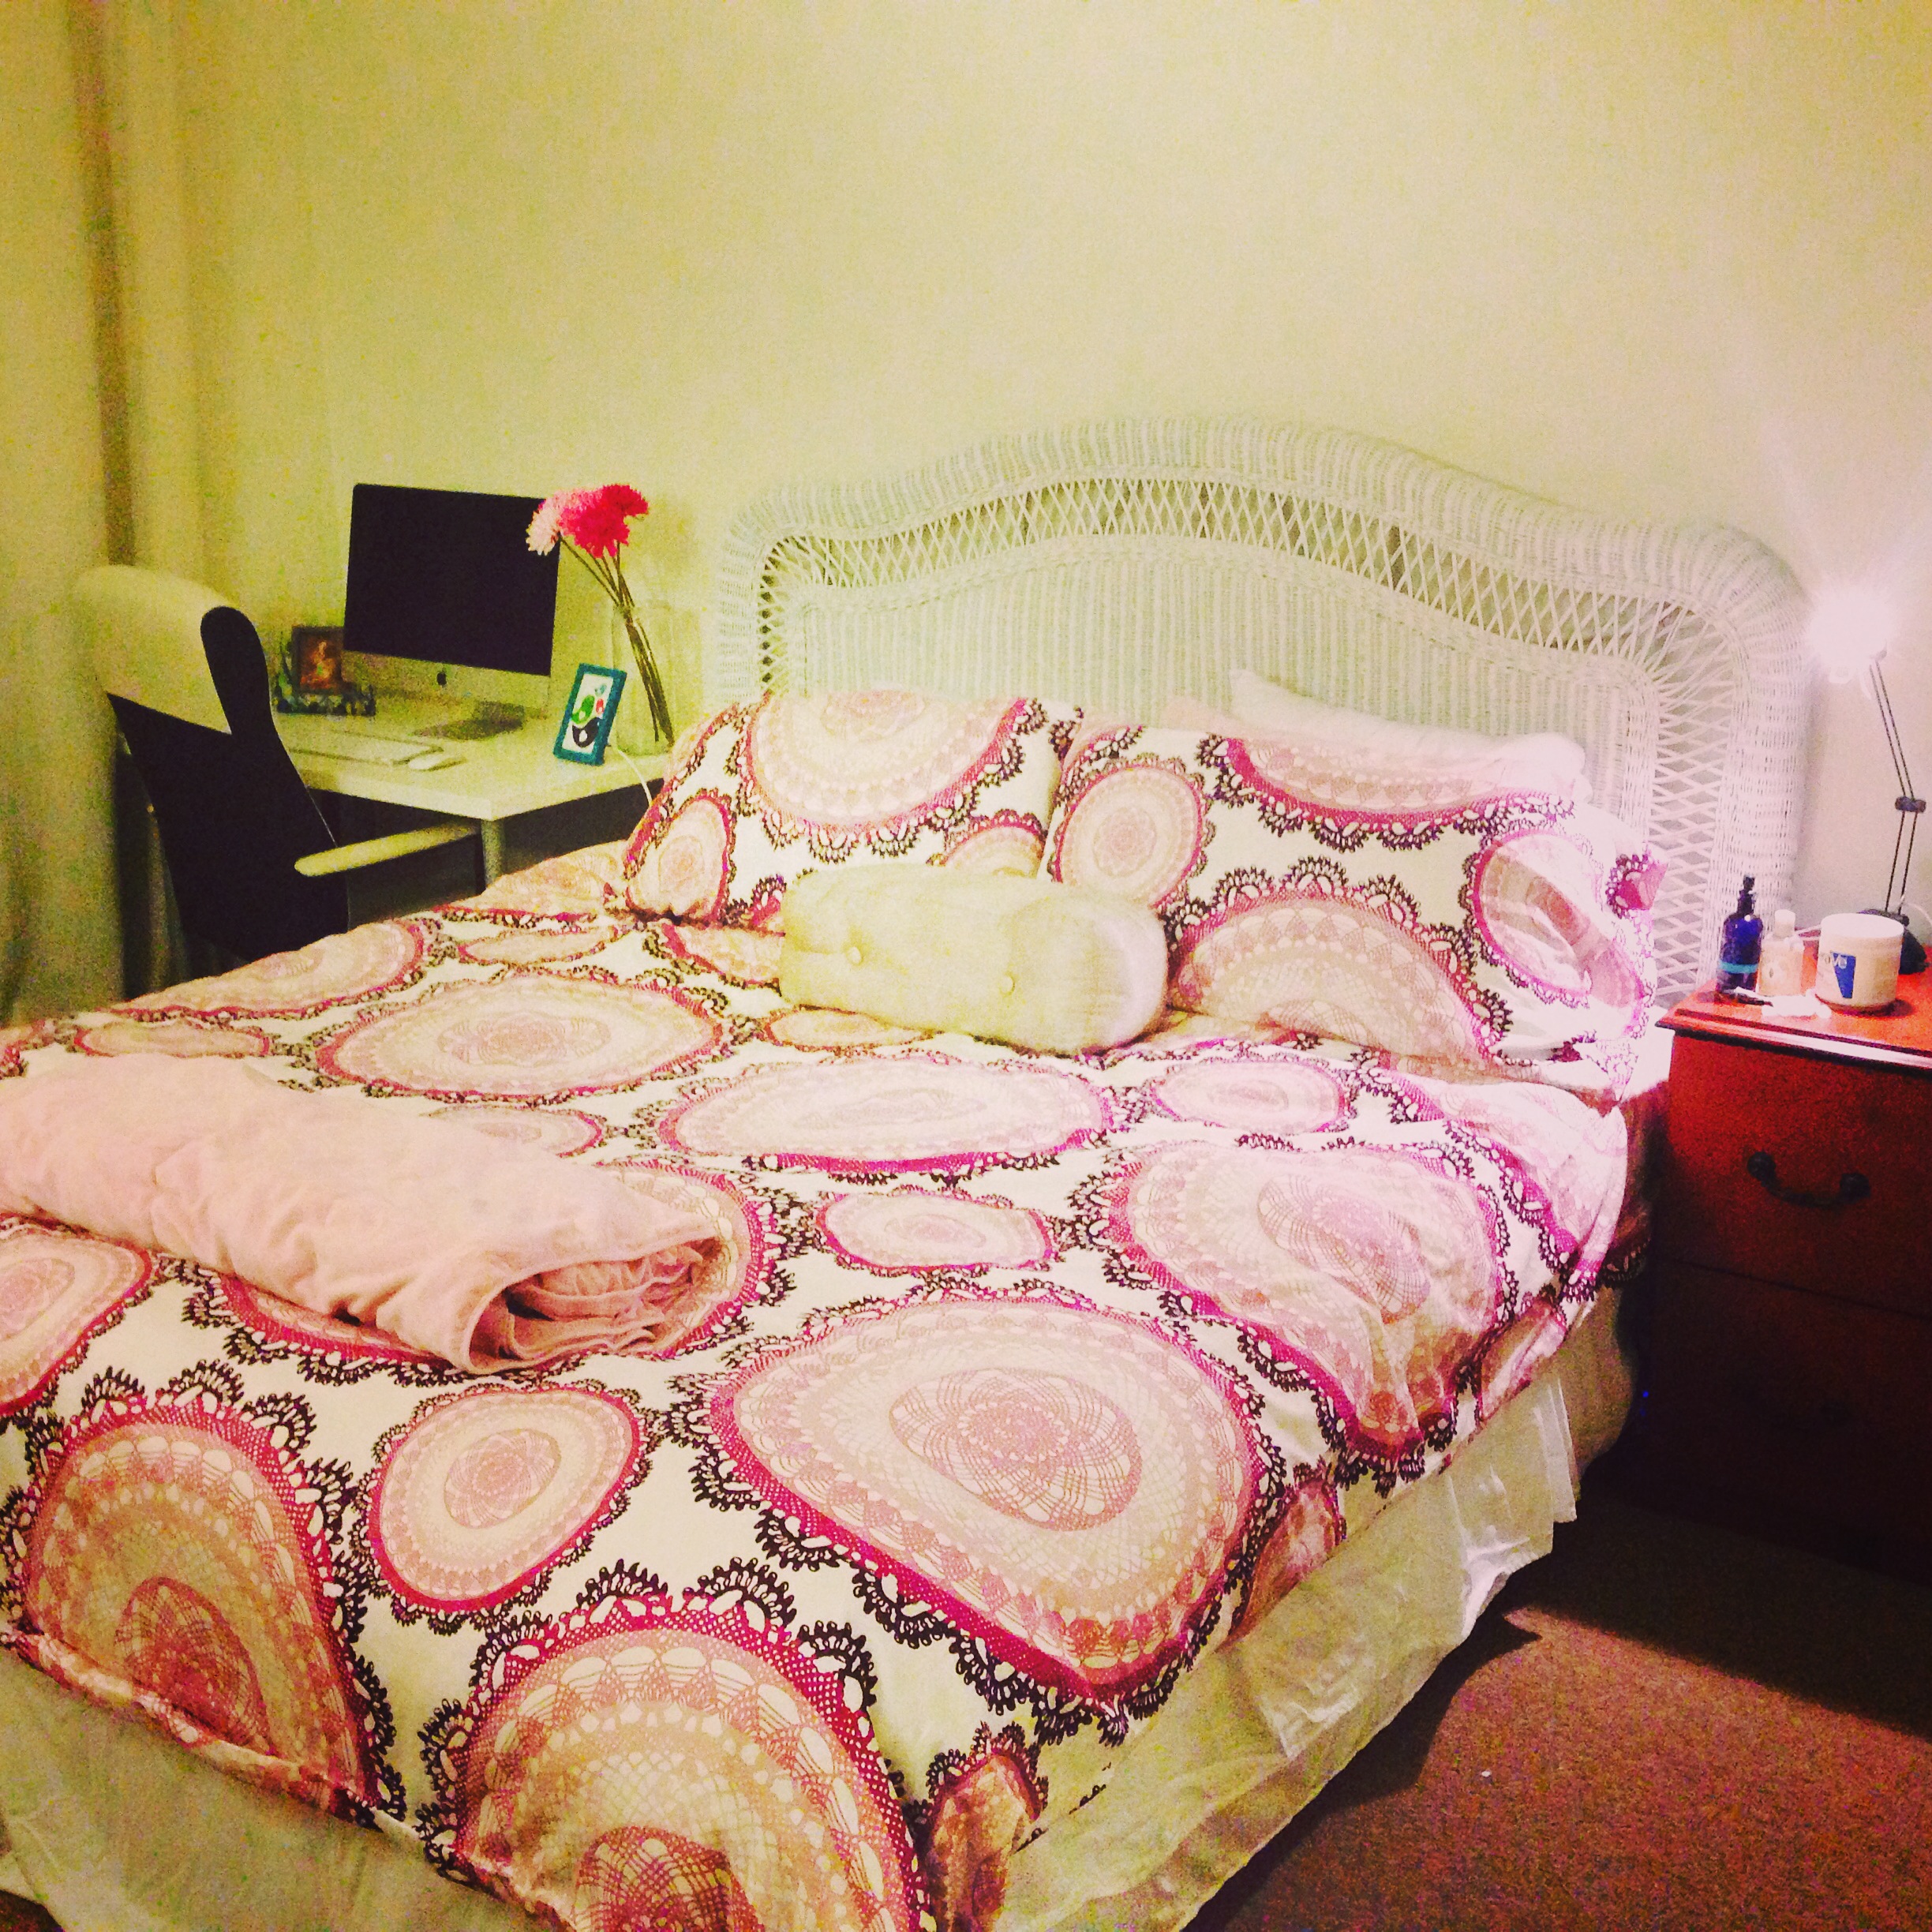 I re-arranged my room to include some work space and got this cute new bedding from Ikea!